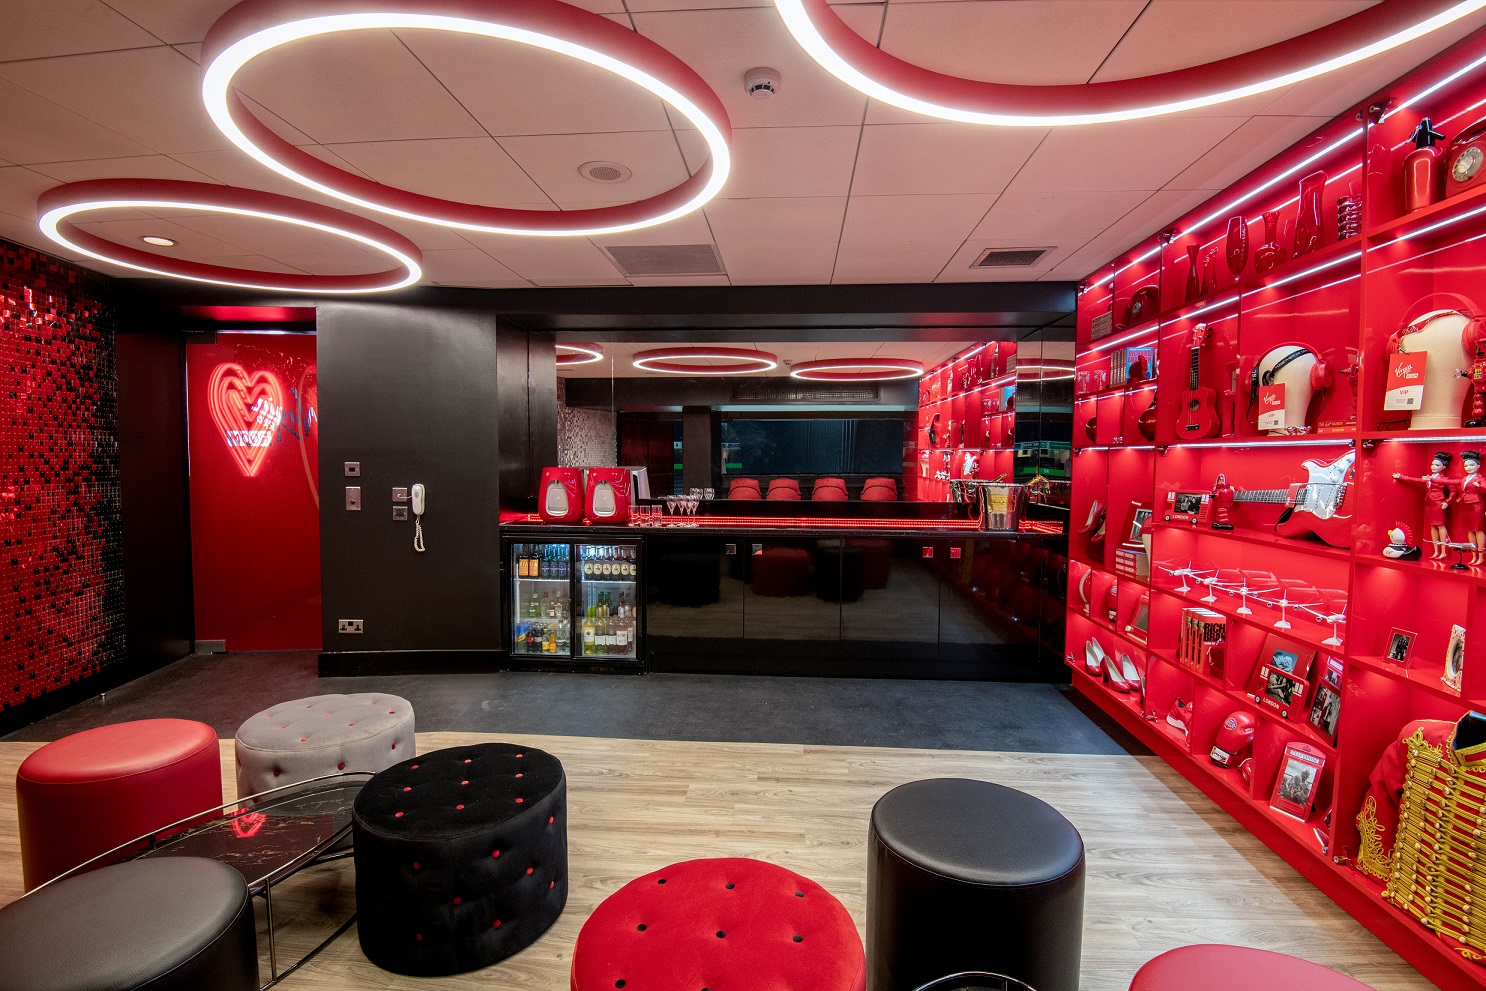 Virgin’s Red Room of fun is waiting for you at Manchester’s AO Arena